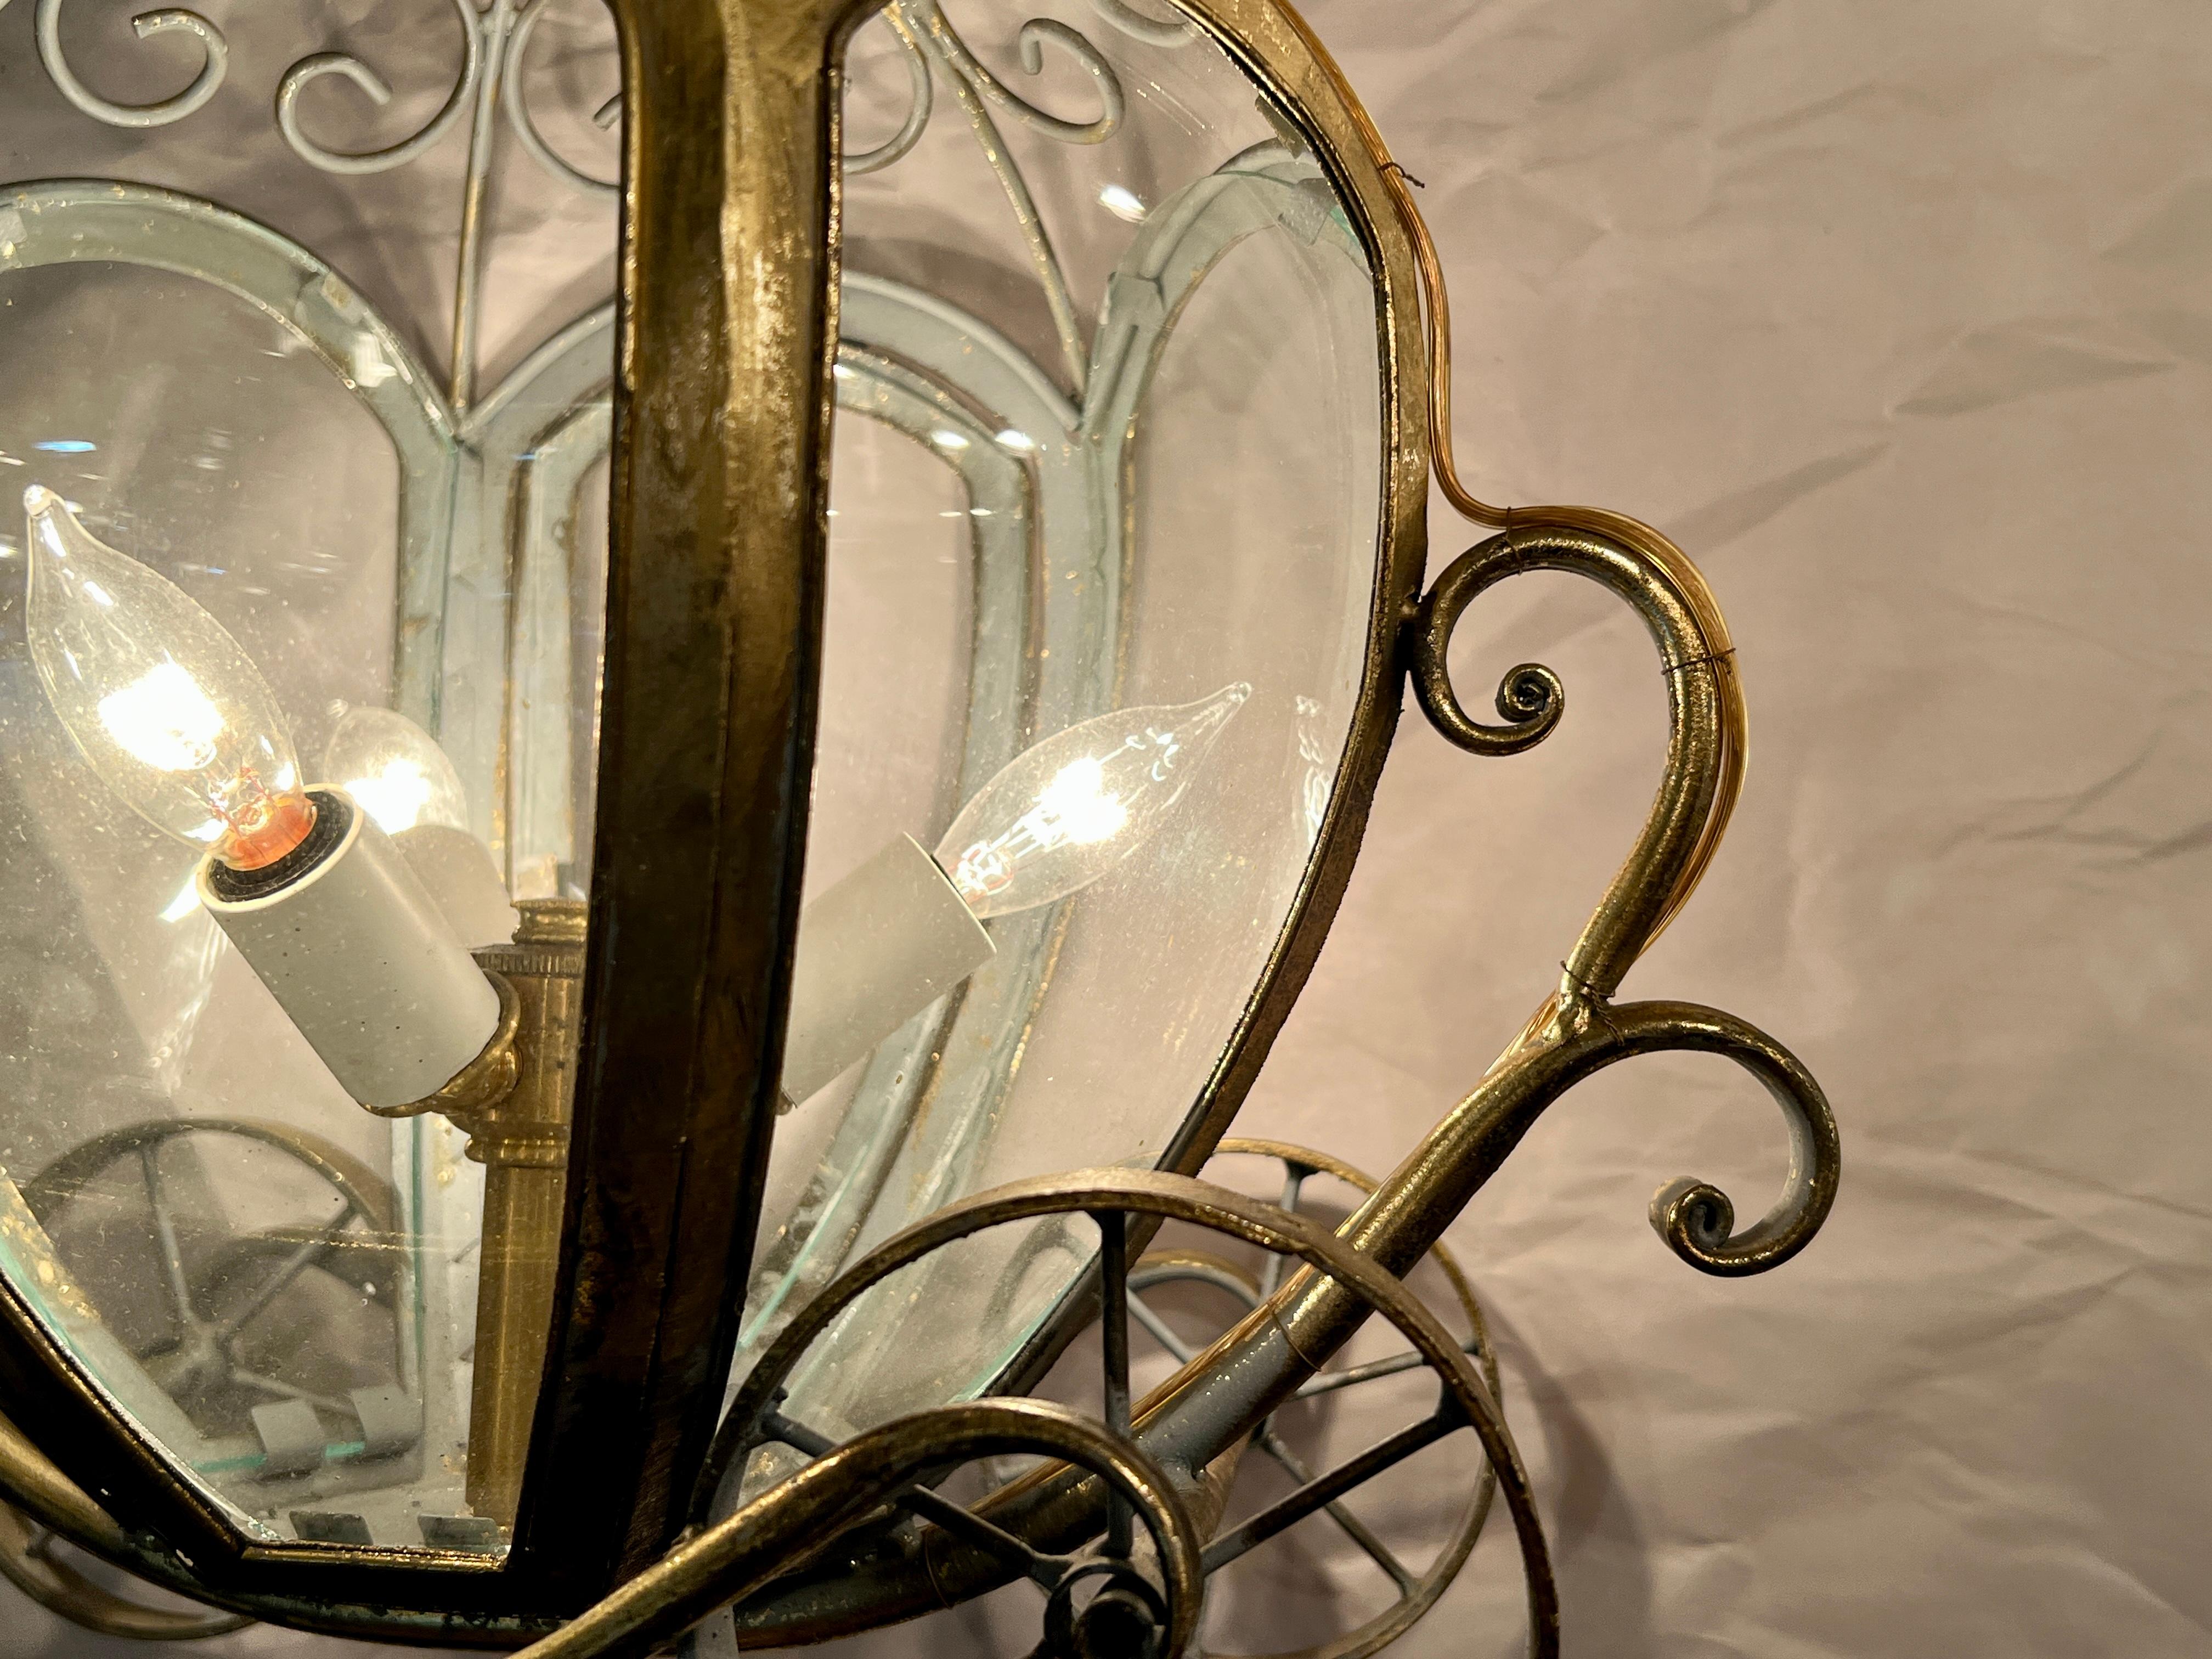 20th Century Unusual Estate Glass and Brass Figural “Carriage” 3-Light Chandelier.